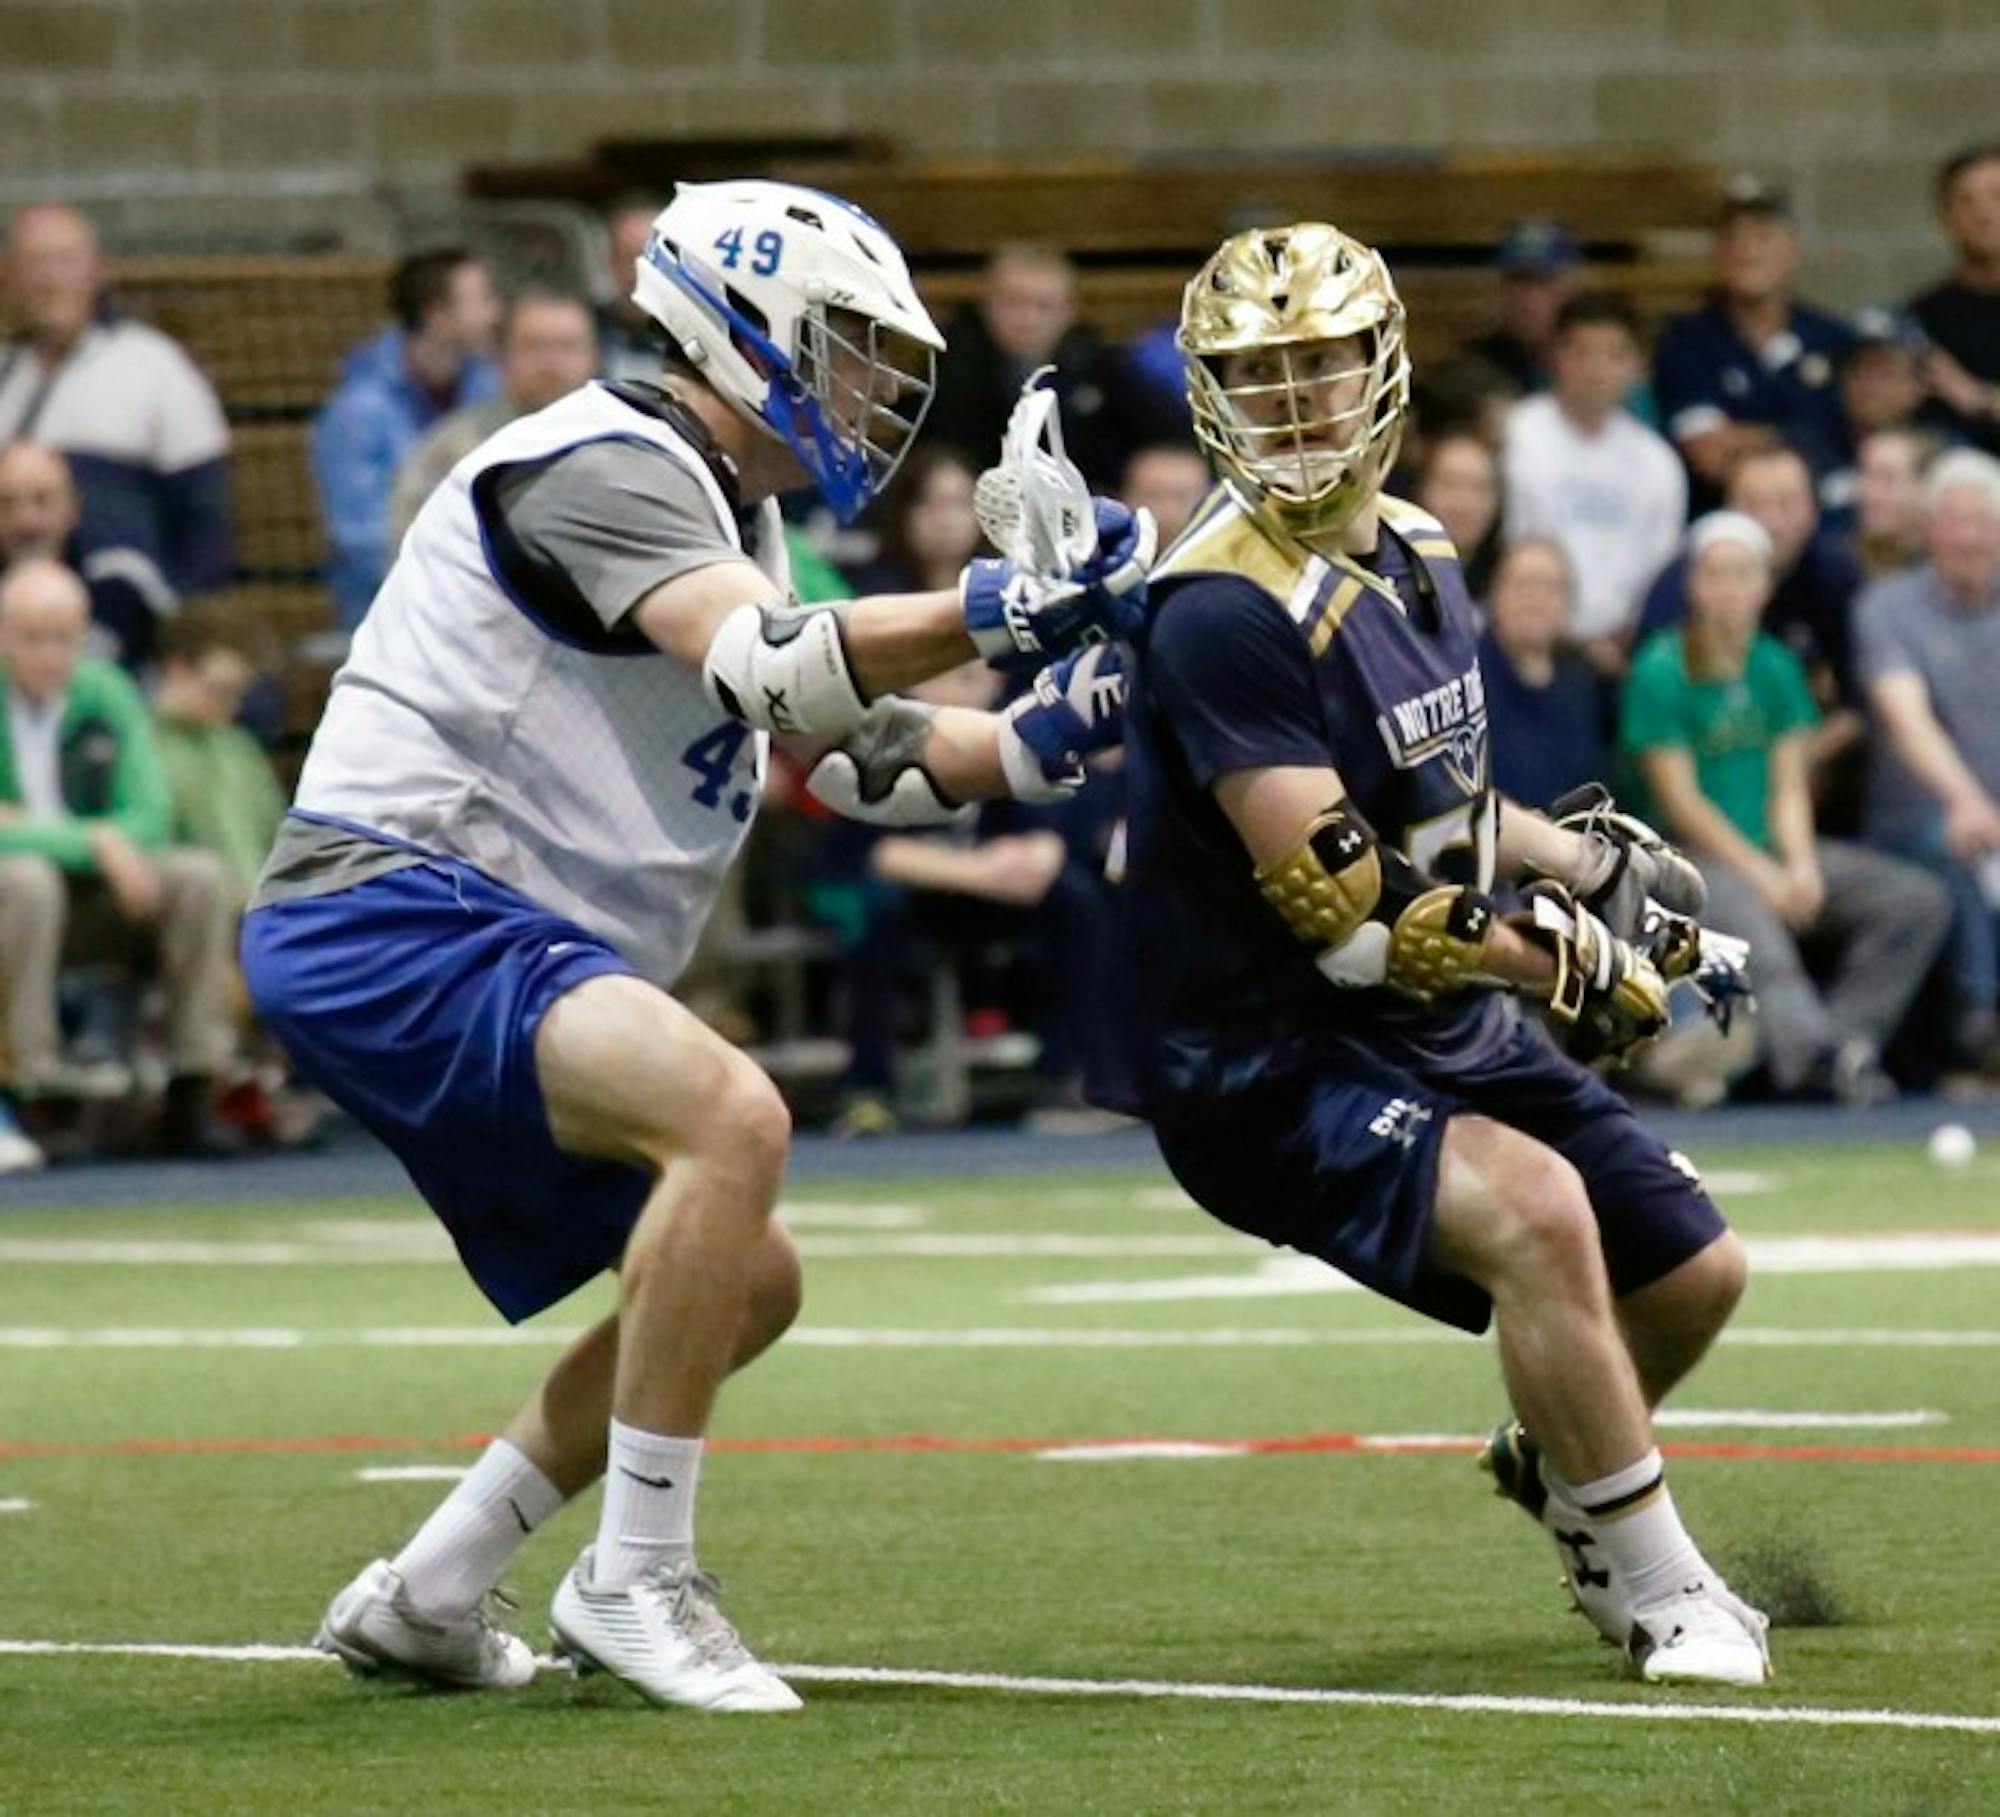 Irish senior attack Matt Kavanagh attempts to shake an Air Force defender during an exhibition game Jan. 30. Kavanagh registered a hat trick for the Irish during their win over Georgetown on Saturday.